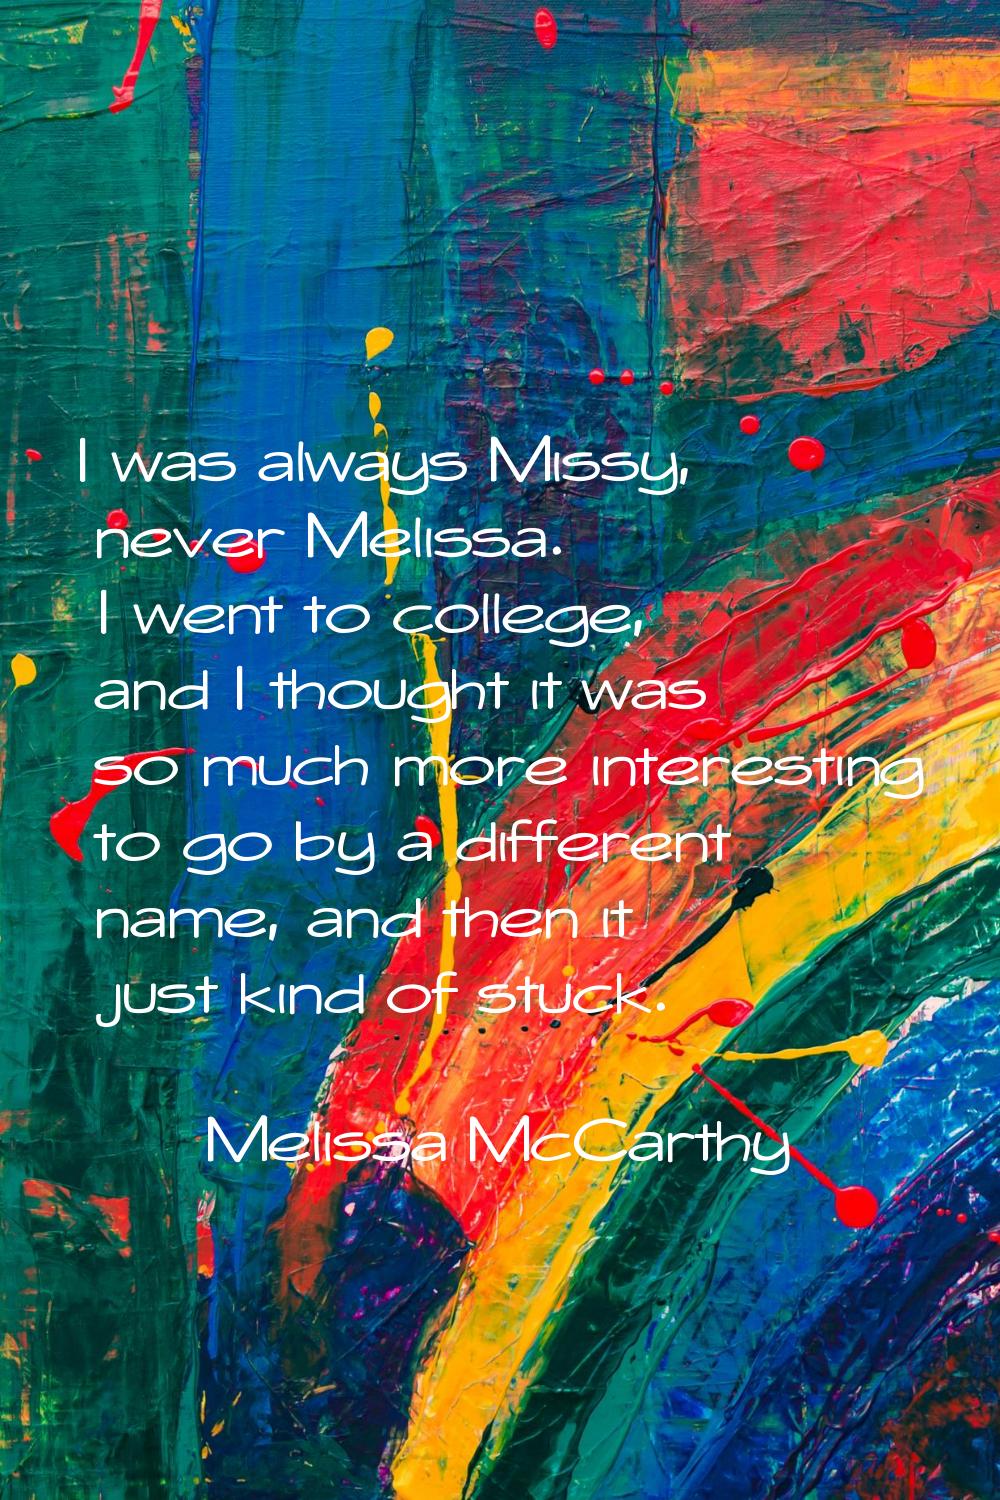 I was always Missy, never Melissa. I went to college, and I thought it was so much more interesting